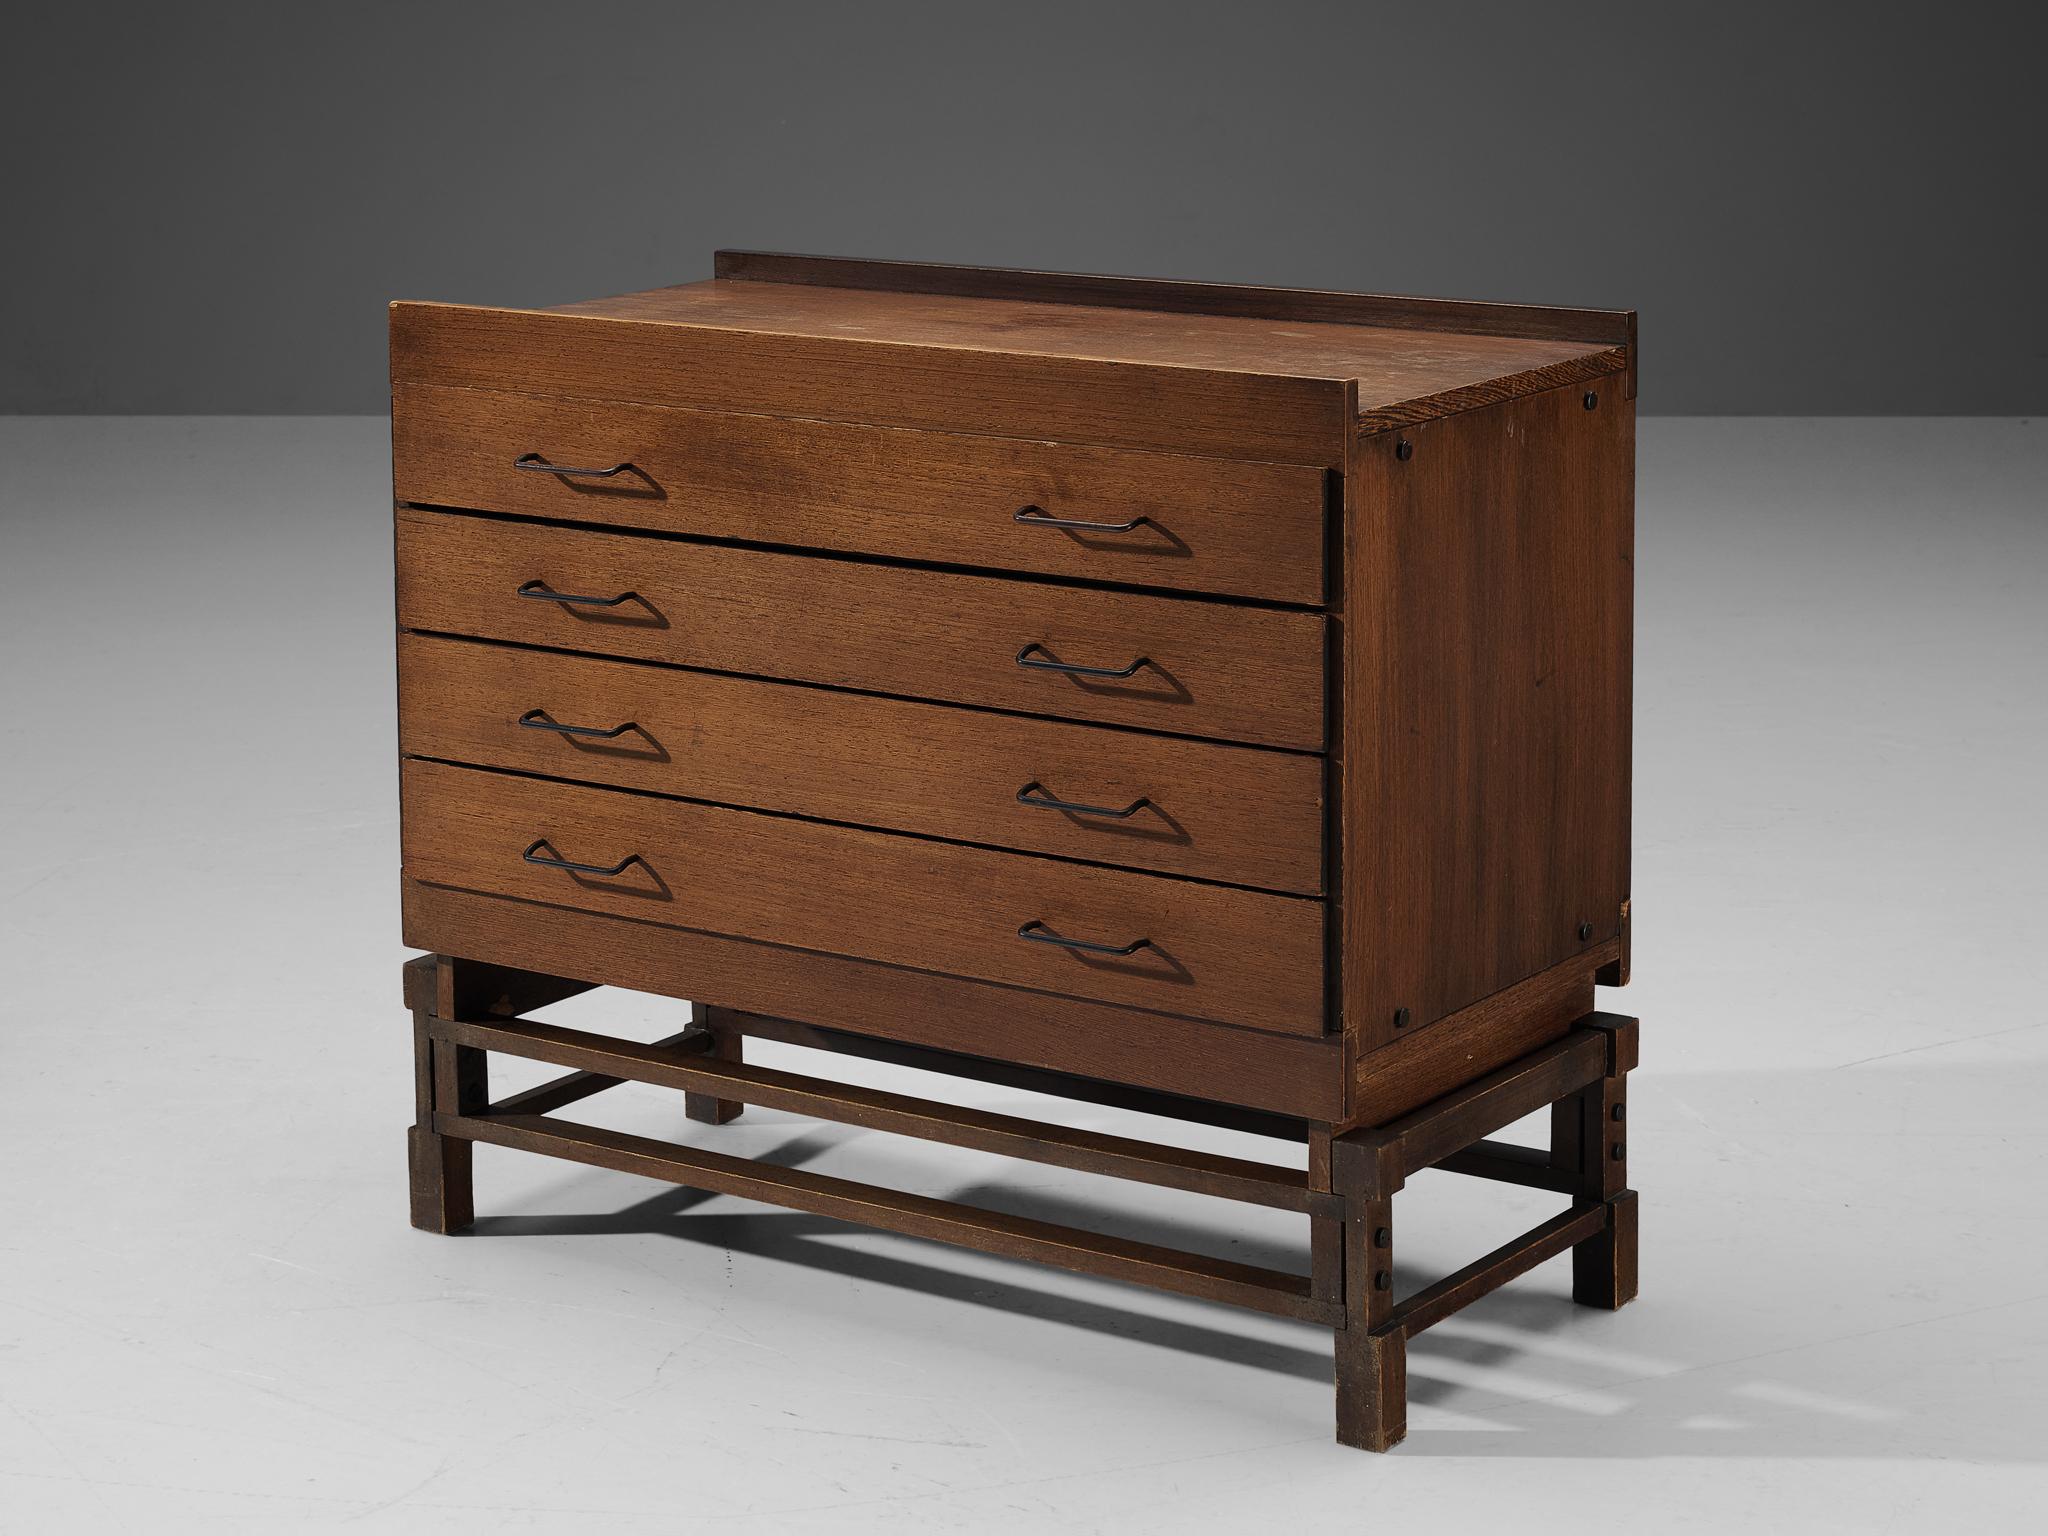 Leonardo Fiori for ISA Bergamo, chest of drawers, wengé, metal, Italy, 1950s

This well-designed piece is based on a solid construction featuring straight lines and right-angled shapes. Functionality comes into play through the availability of great